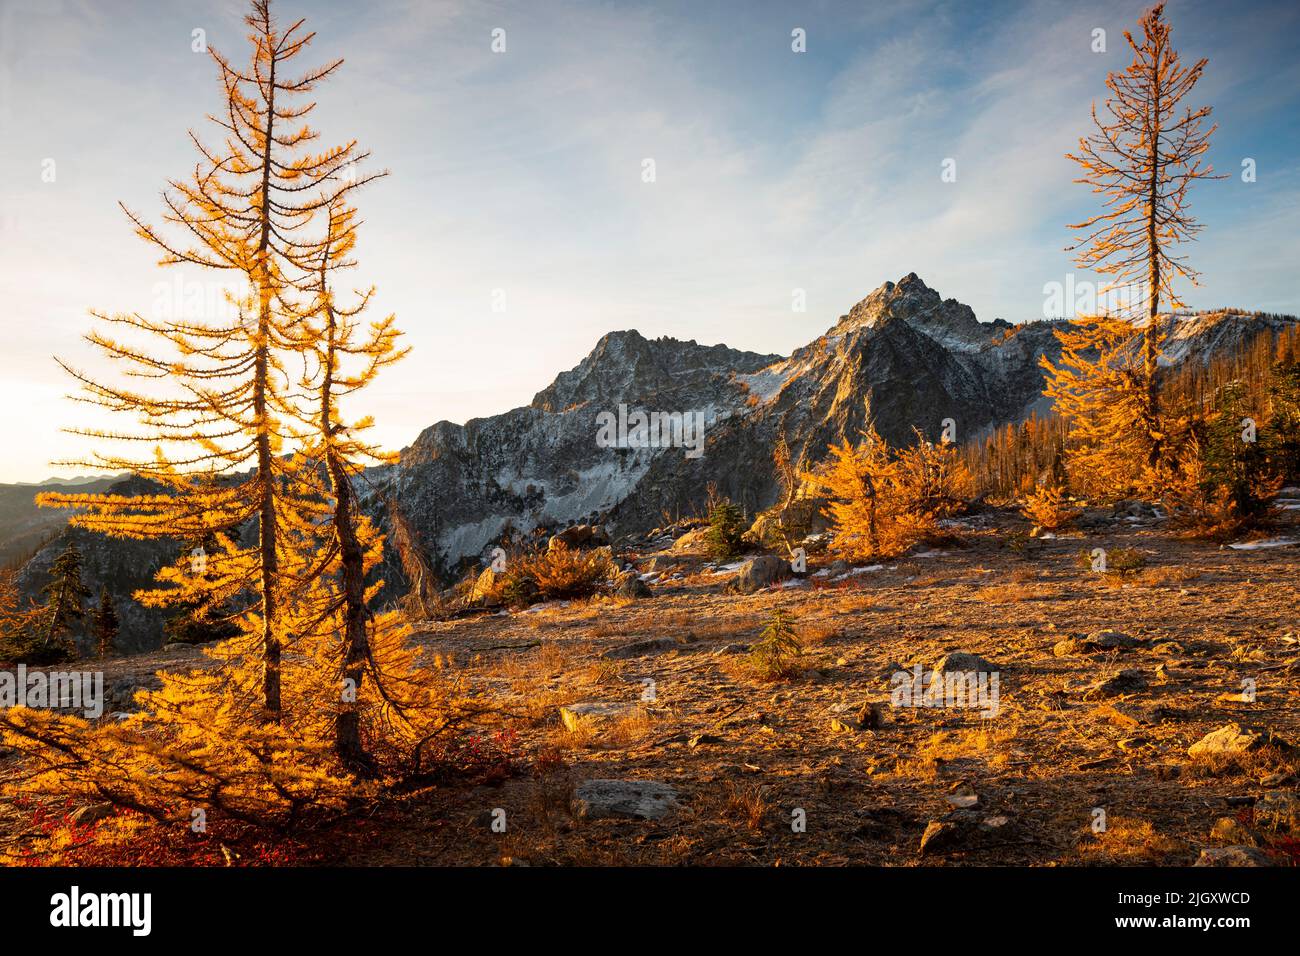 WA21760-00...WASHINGTON - Early morning light on alpine larch trees in the Entiat Mountains area of Glacier Peak Wilderness. Stock Photo